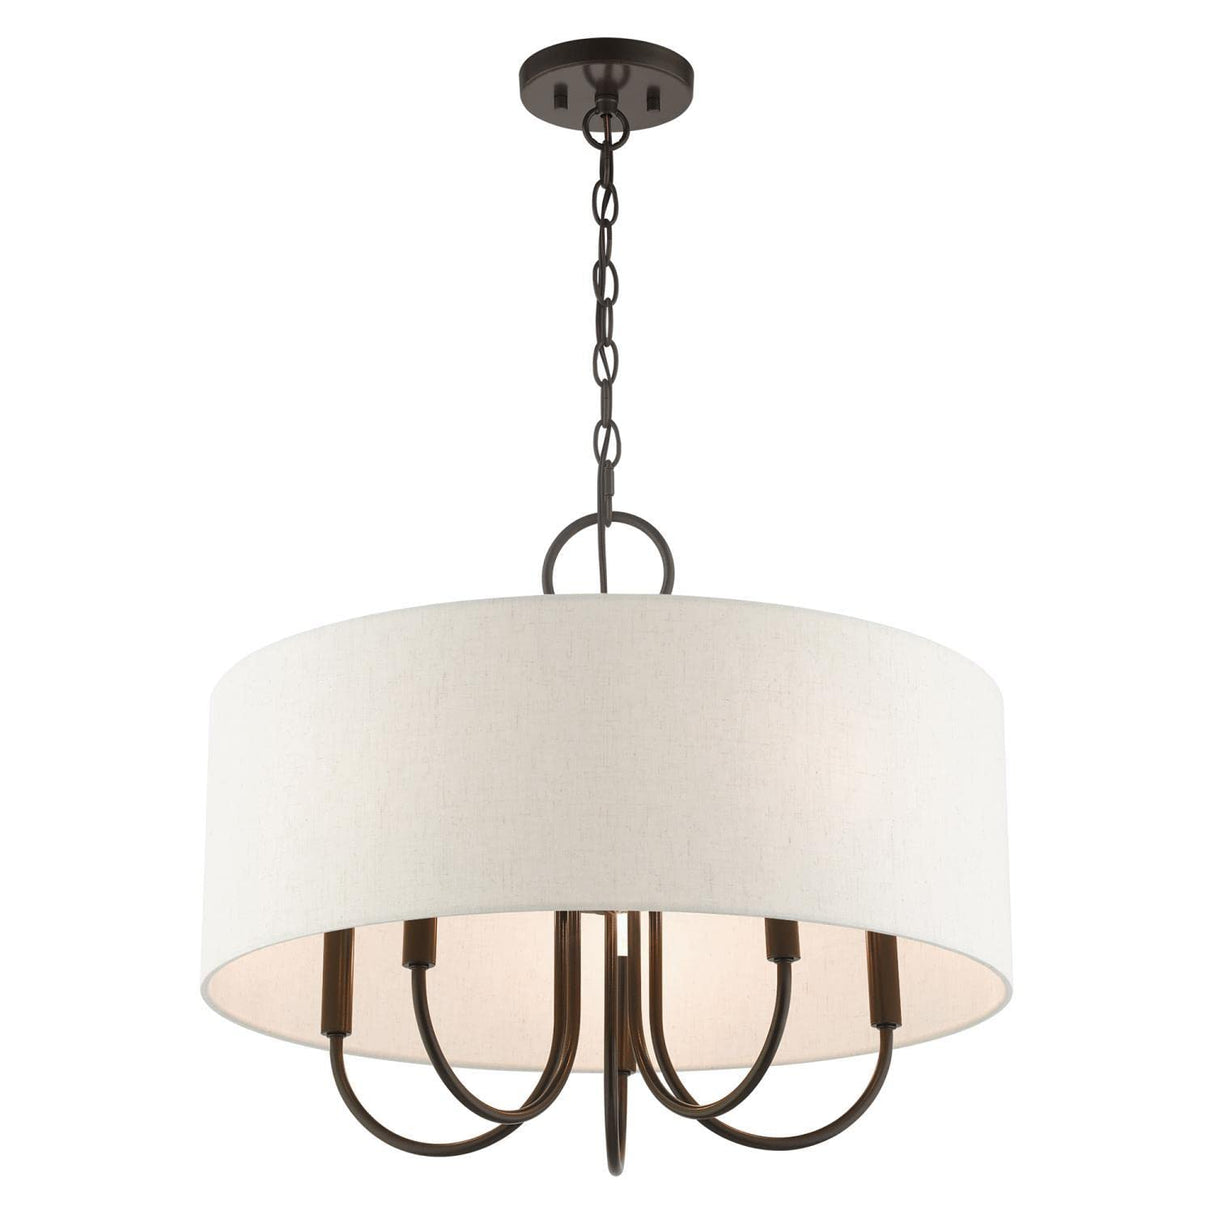 Livex Lighting 49805-92 Blossom Collection 5-Light Pendant Chandelier with Oatmeal Color Hardback Fabric Shade, English Bronze, 22 x 22 x 18